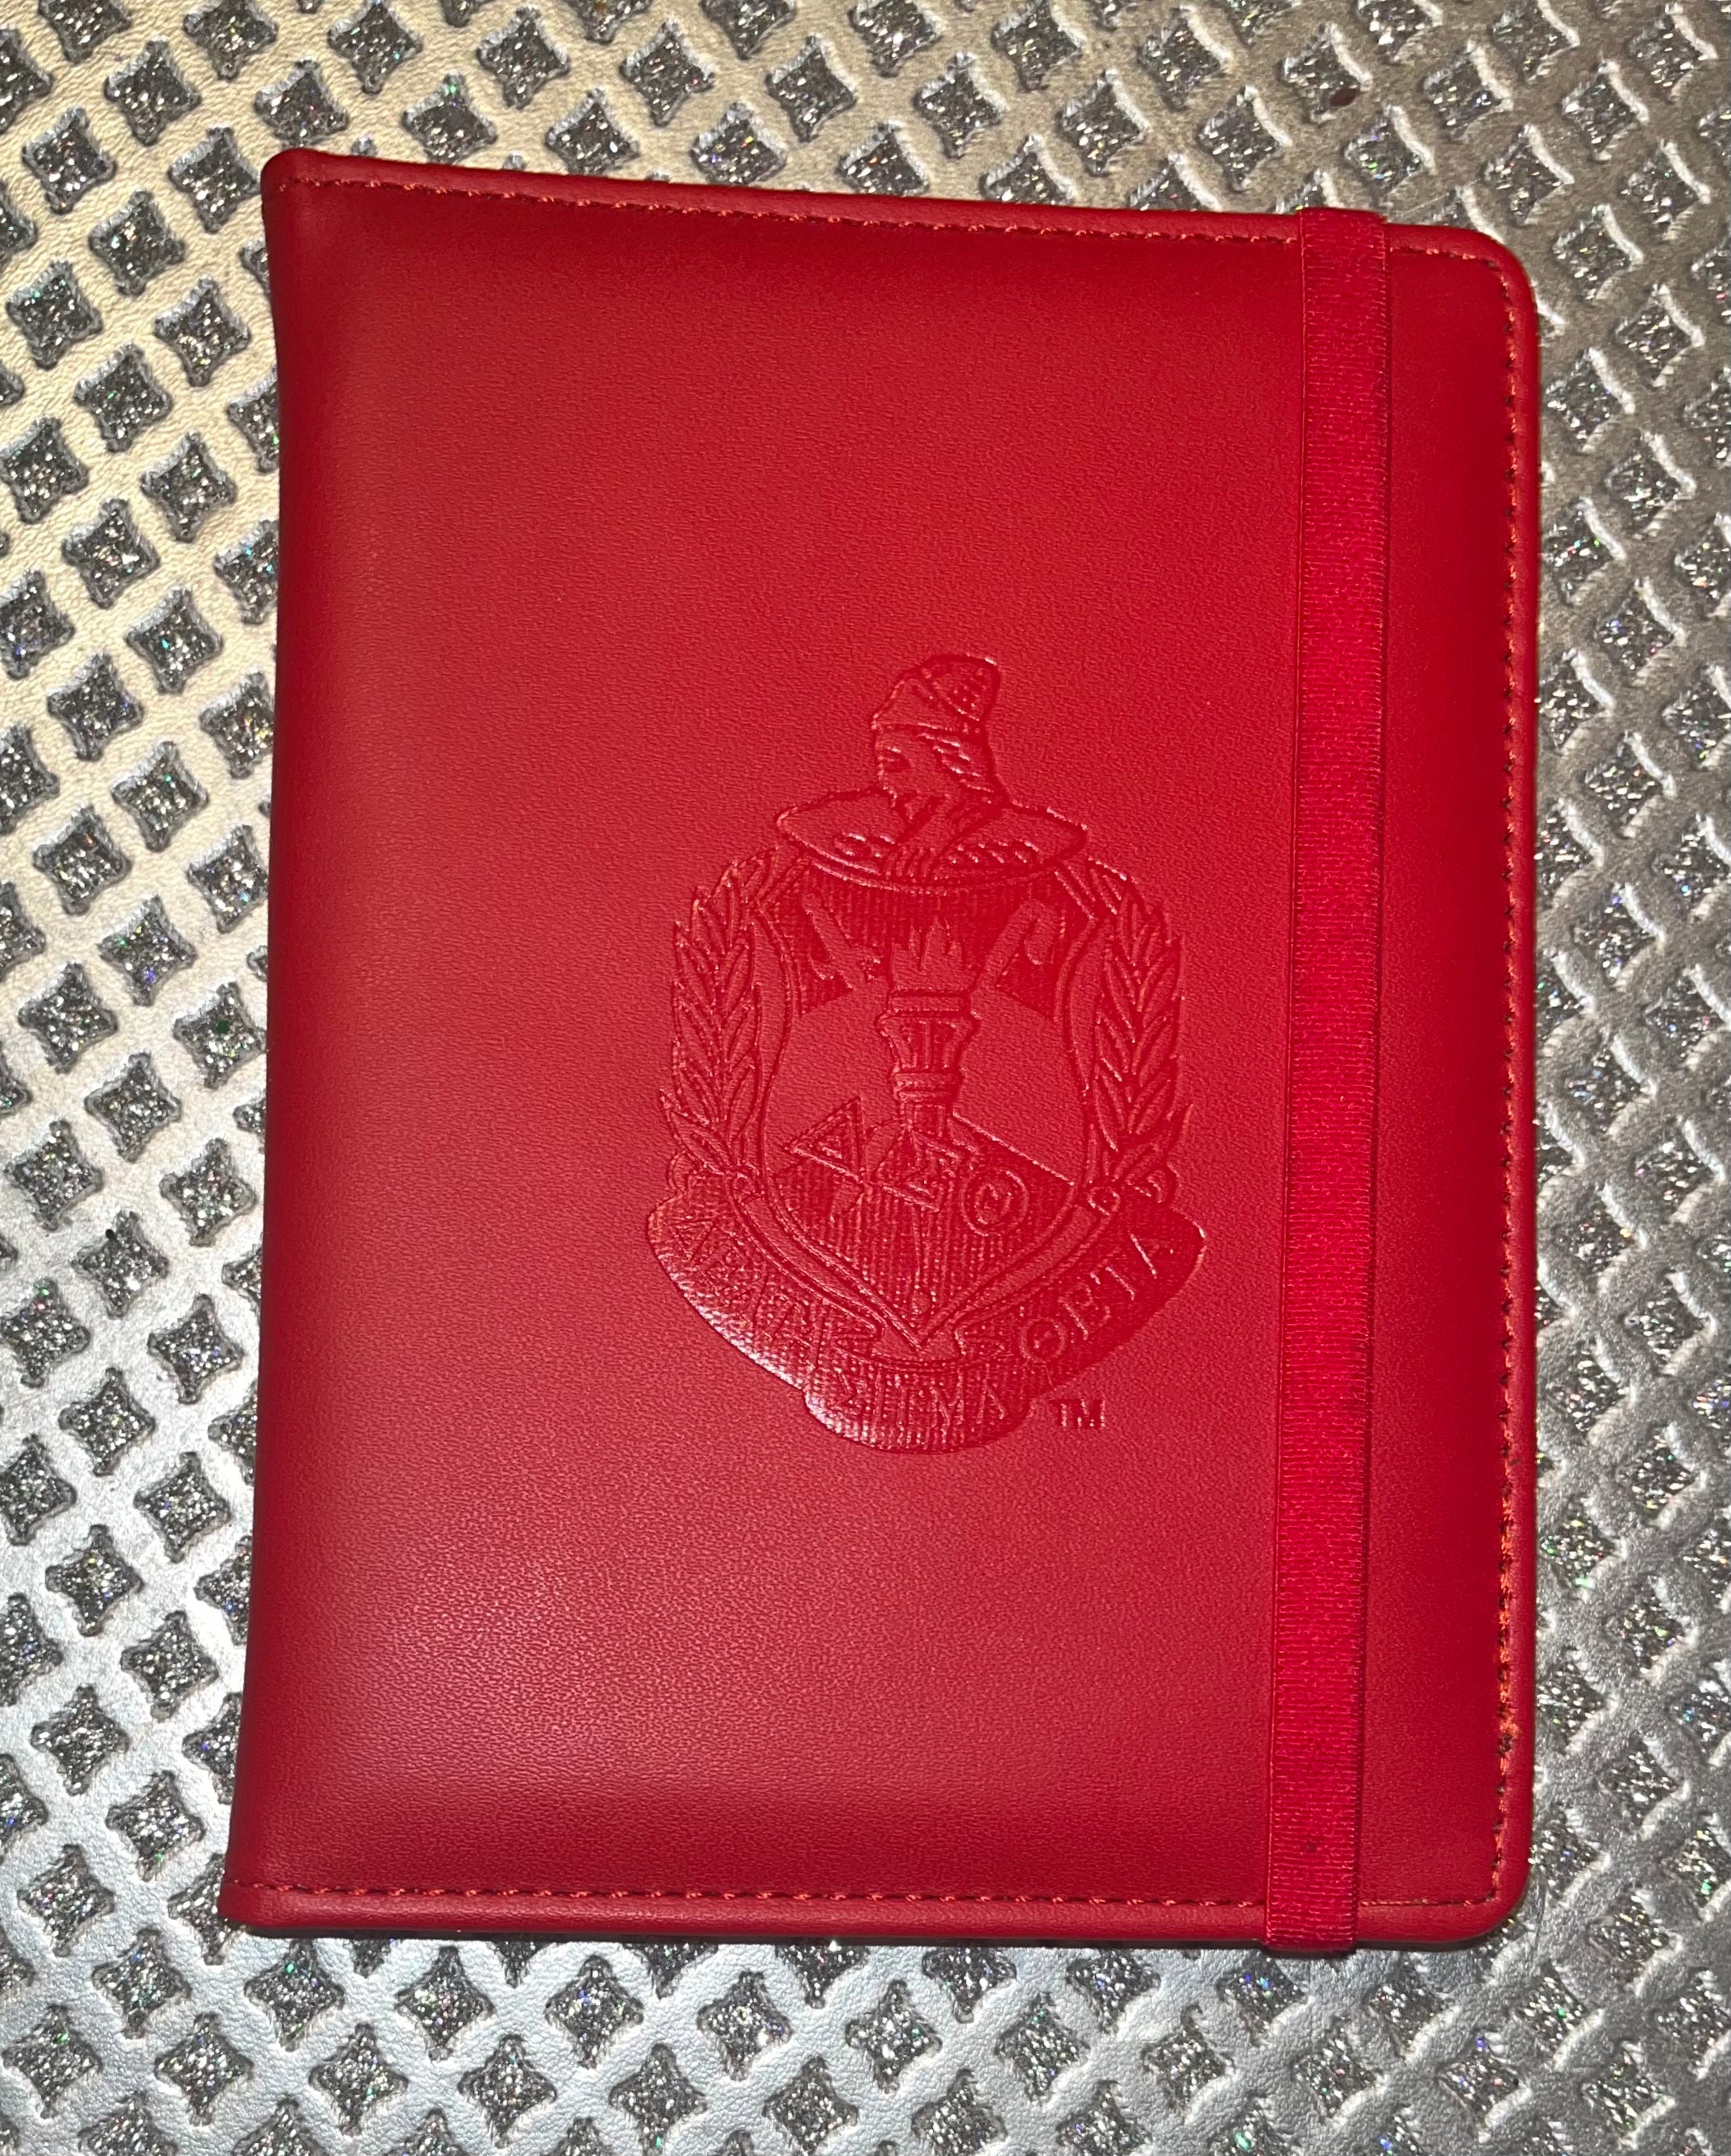 Passport Cover Delta Sigma Theta with Sorority Crest on front - shopsmitees